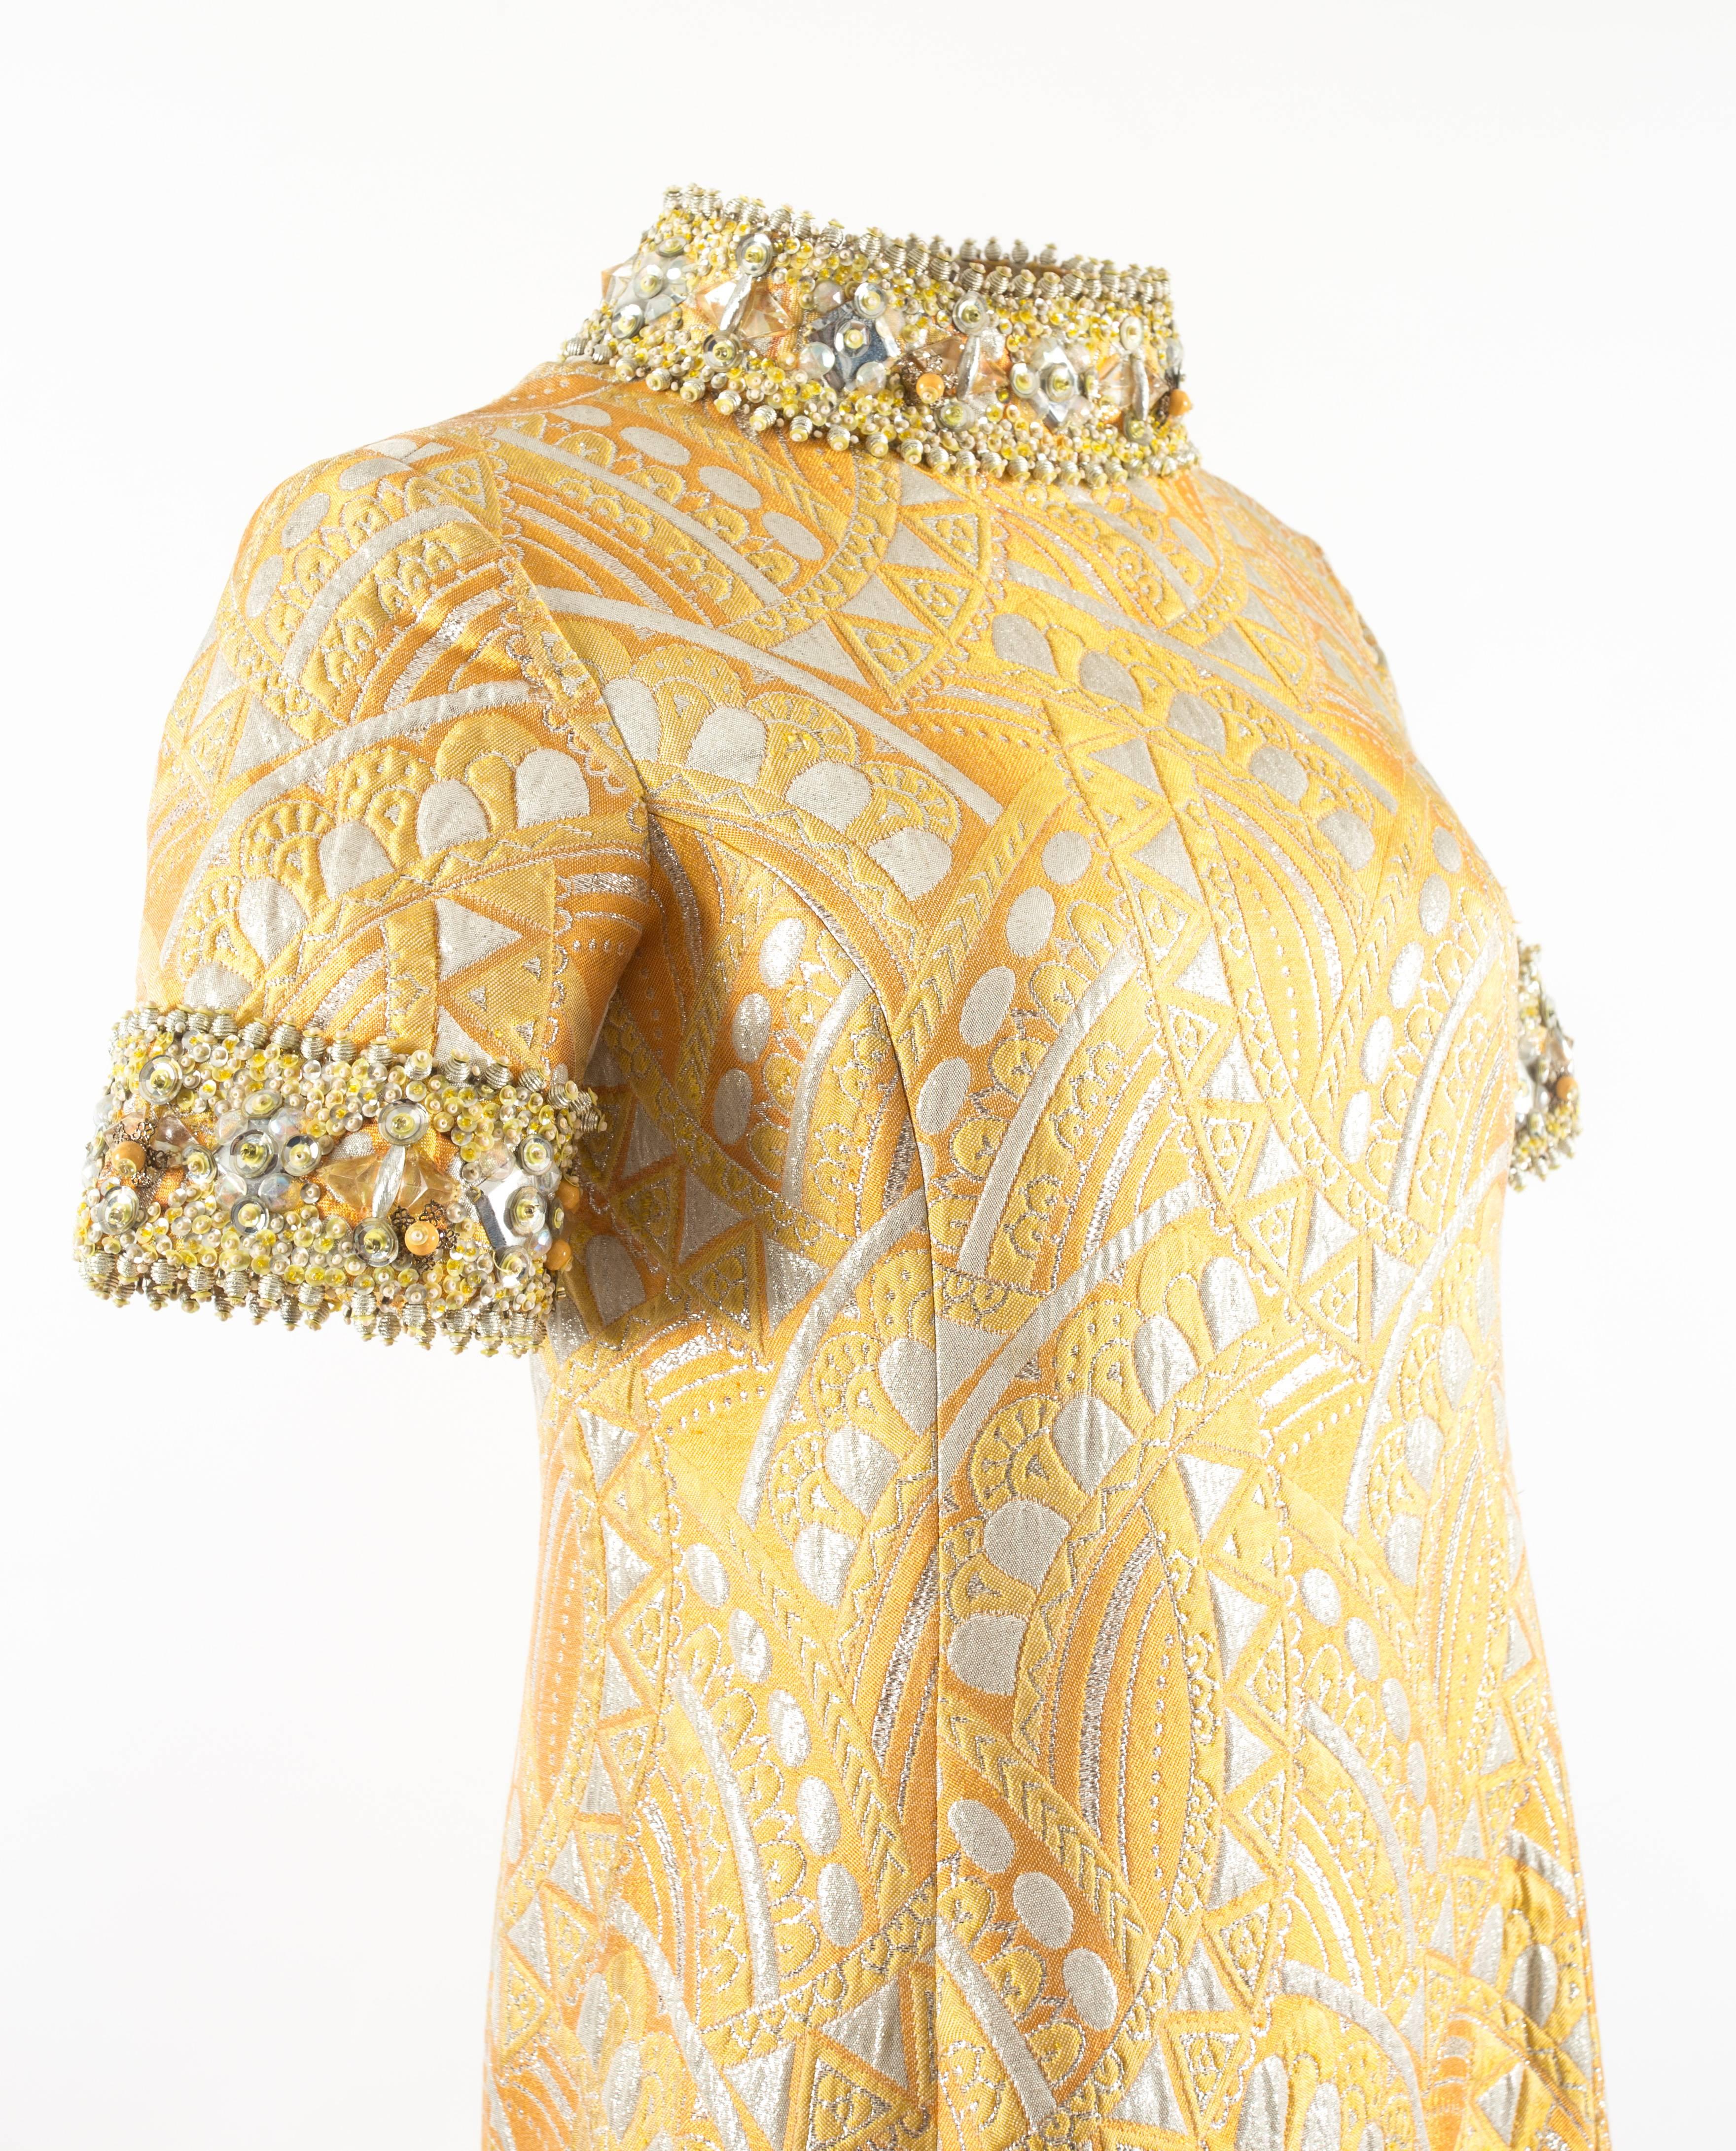 Bellvile Sassoon 1968 A-line brocade embellished evening dress.

The dress was designed by Belinda Bellville in the 1960s under her own label 'Bellville' which later became Bellville Sassoon by name in 1970 by the partnership of David Sassoon.